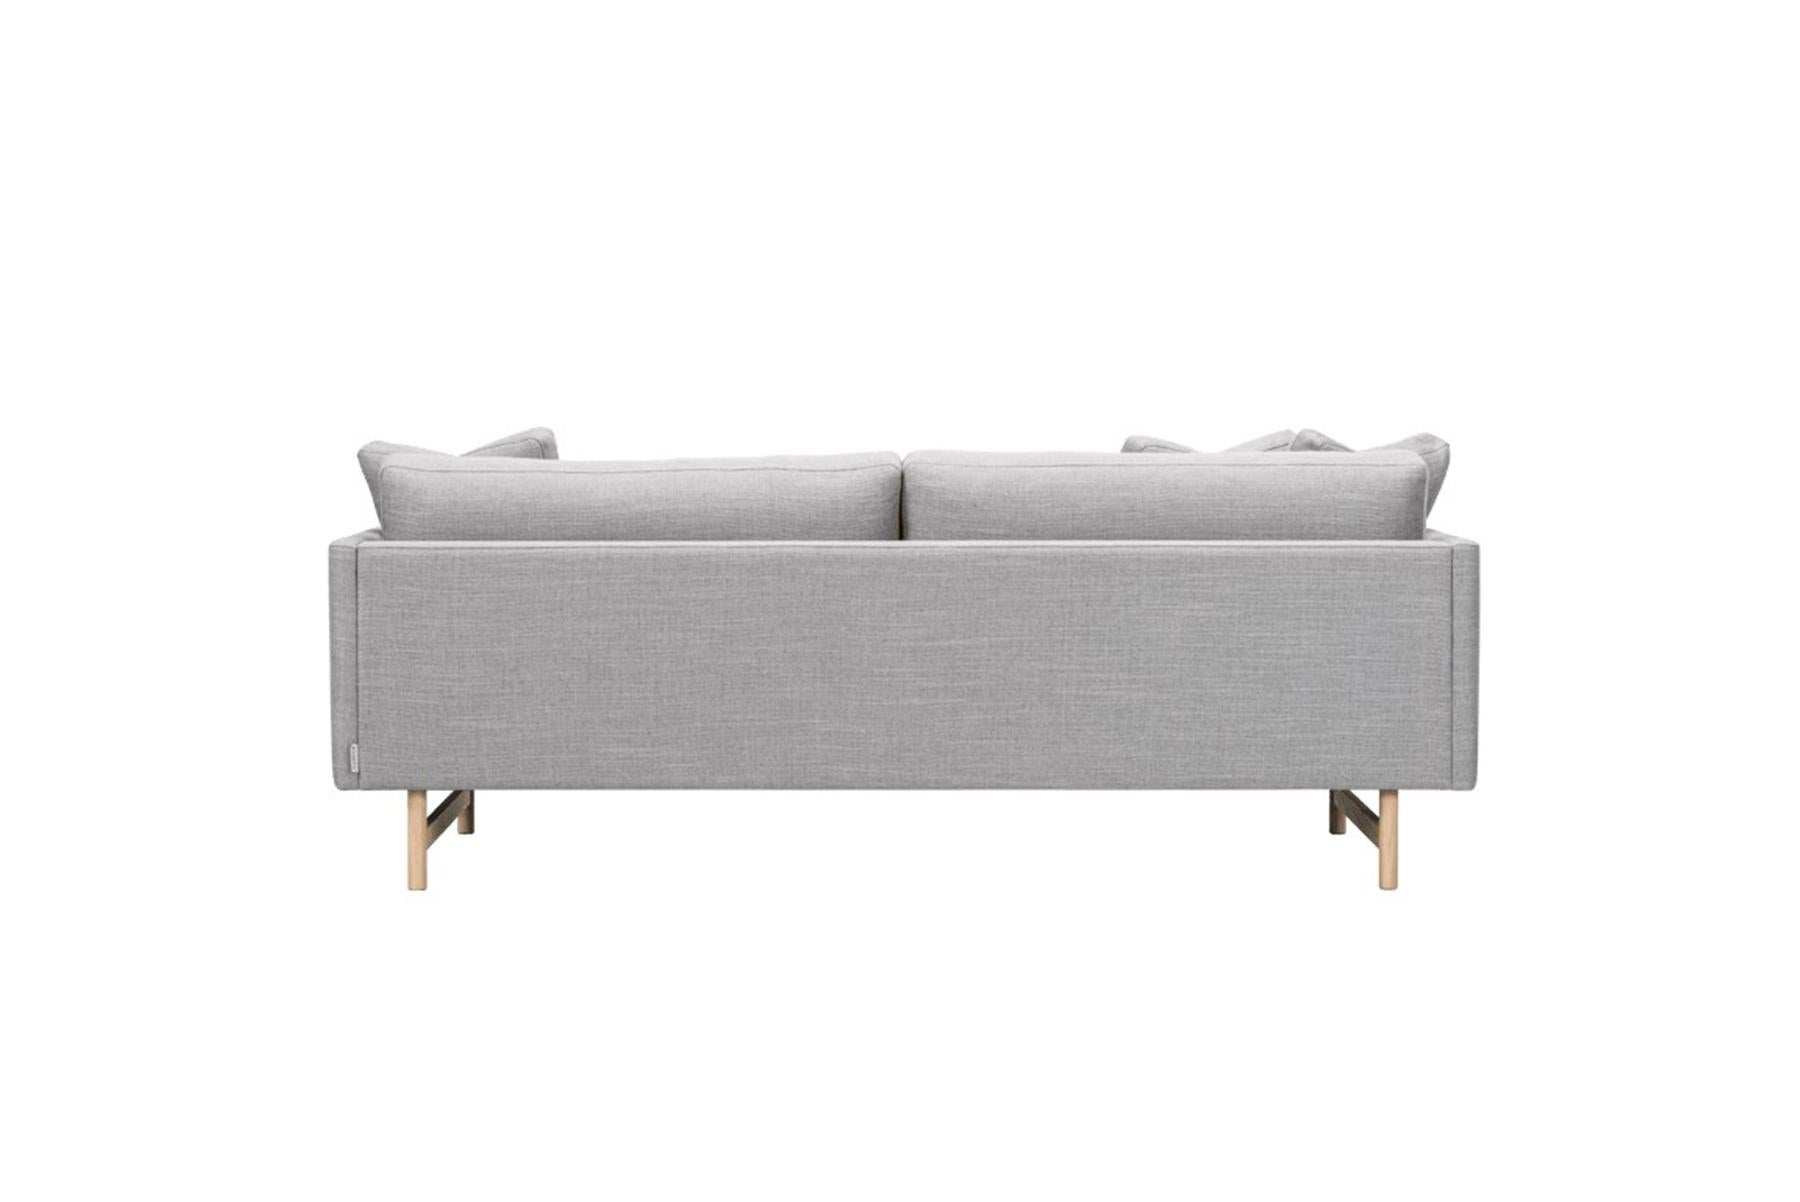 Hugo Passos Calmo sofa 95 – 2-seater – wood base is simple and serene in this expansive 3-seater Calmo sofa, where straight lines converge with discrete curved details. Comfy cushions complete the picture in this understated expression of elegance.